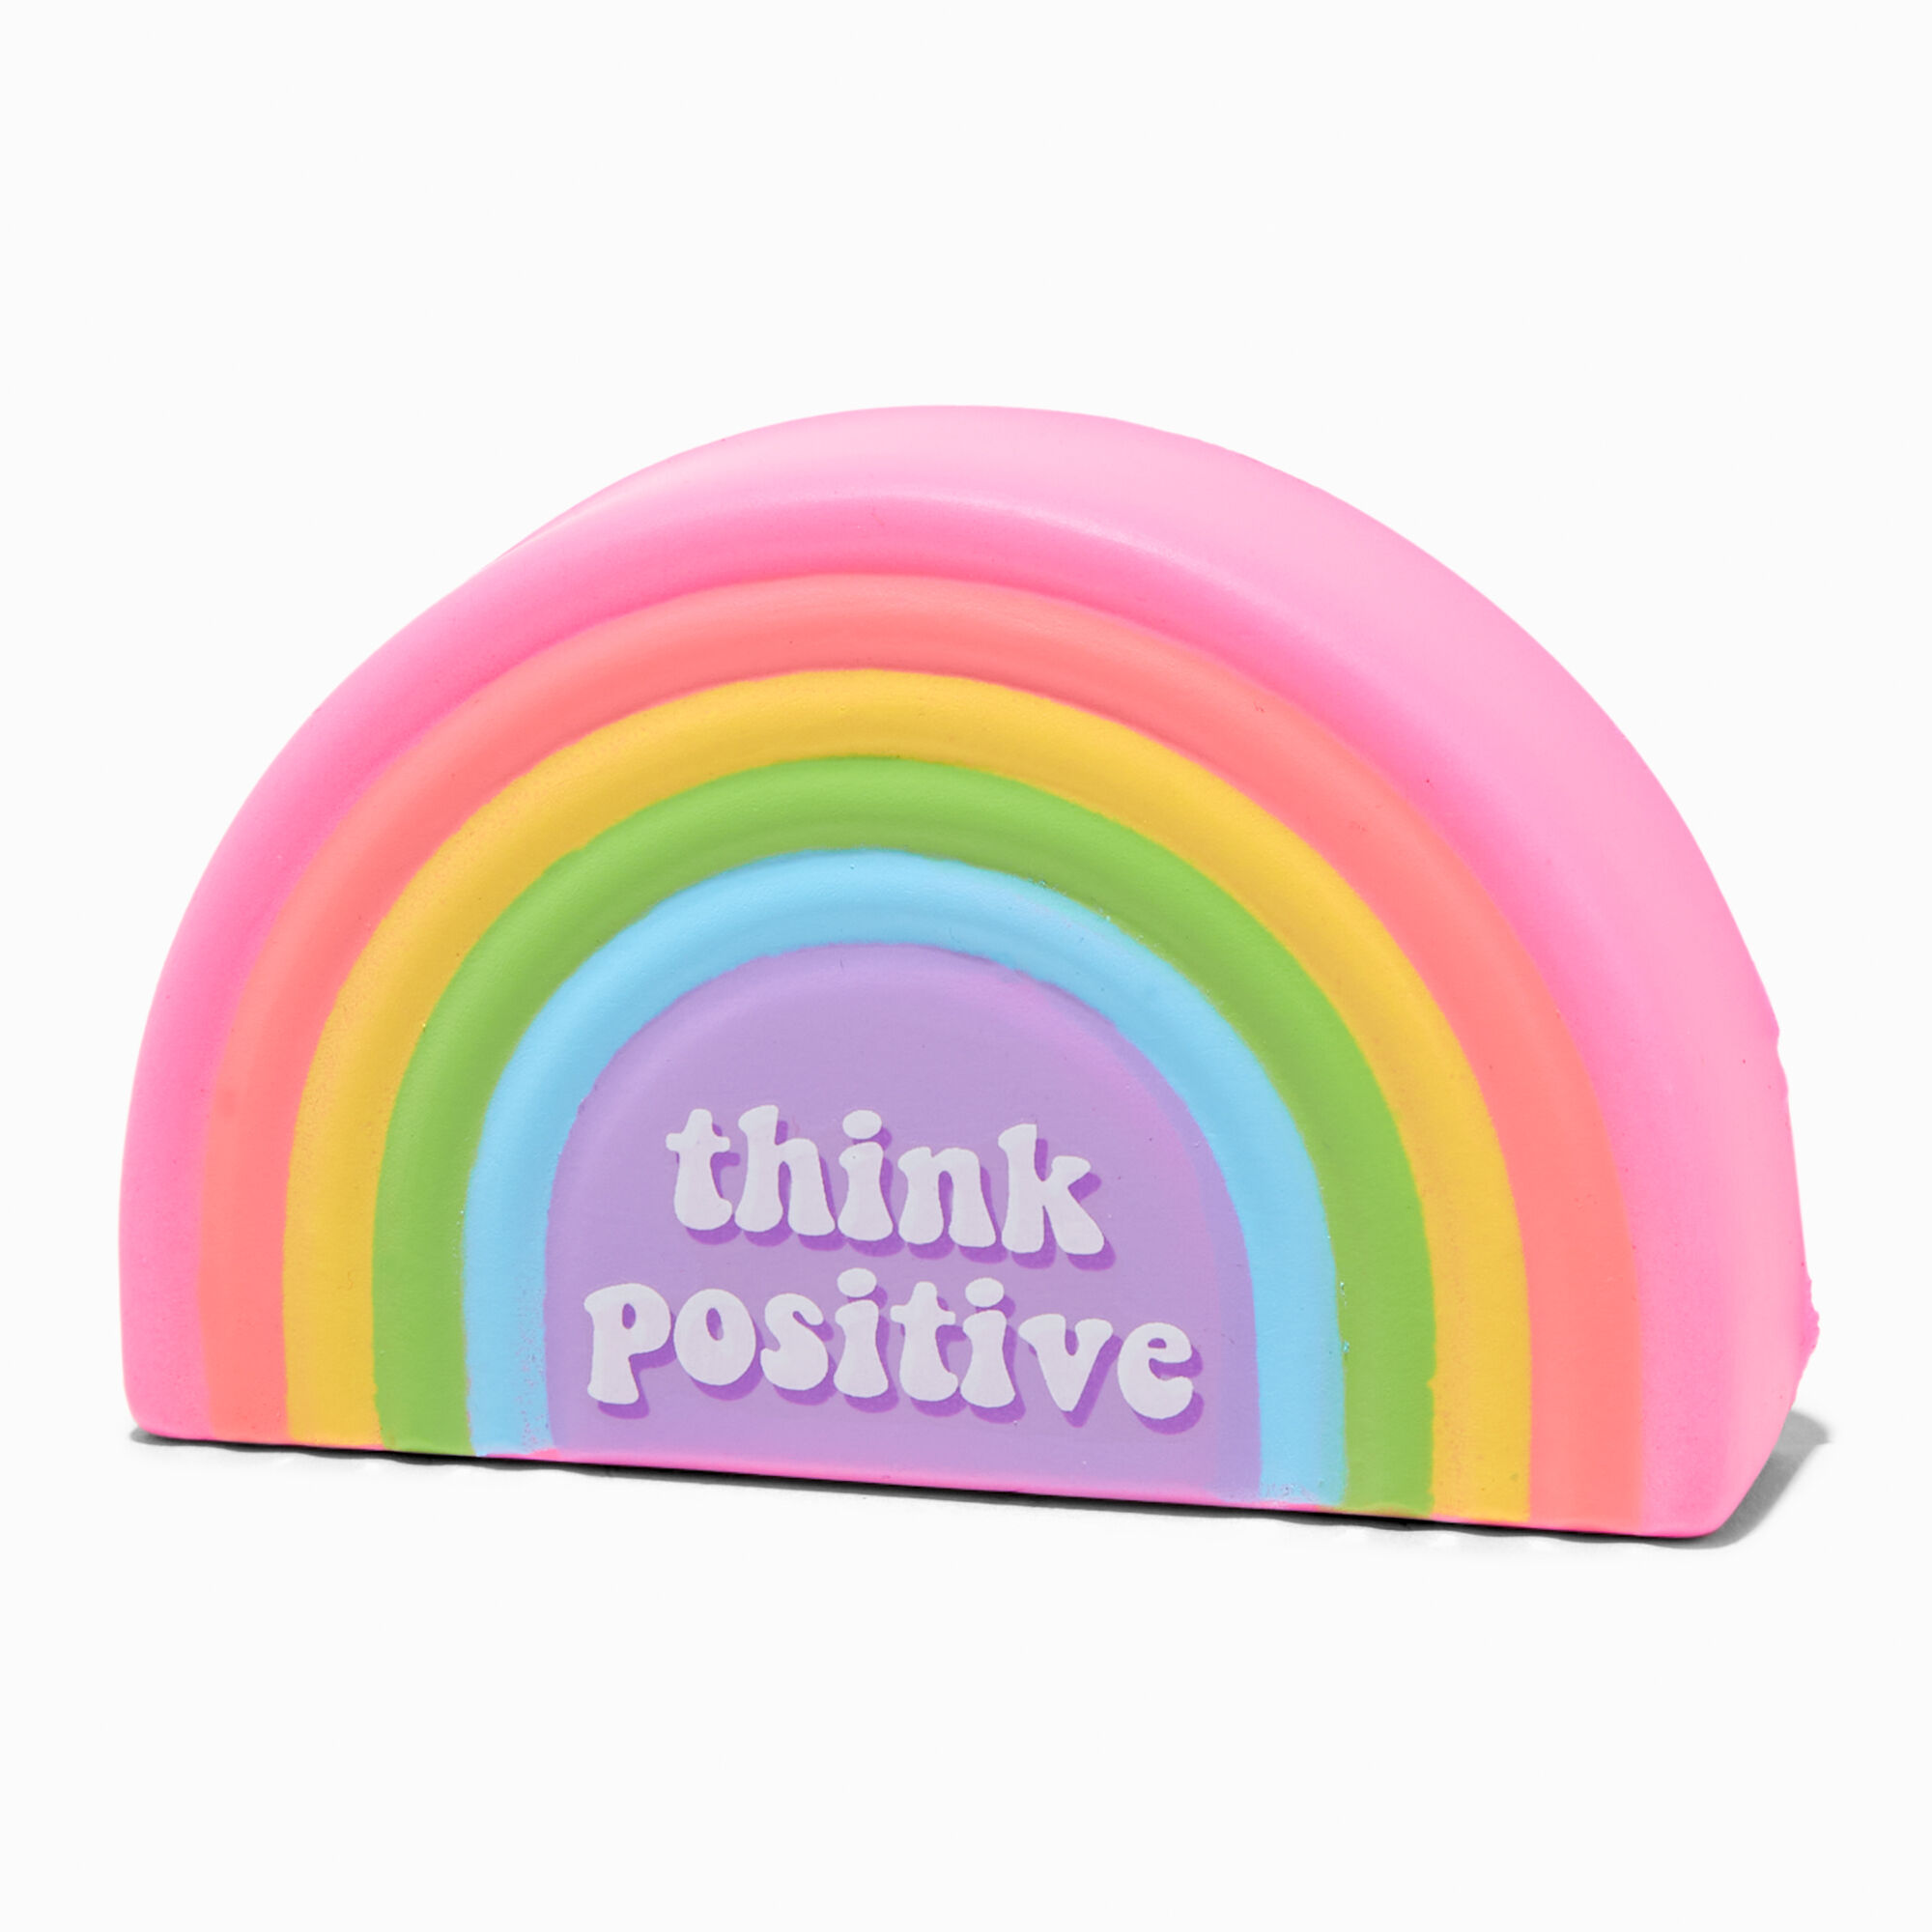 View Claires Think Positive Stress Ball Rainbow information